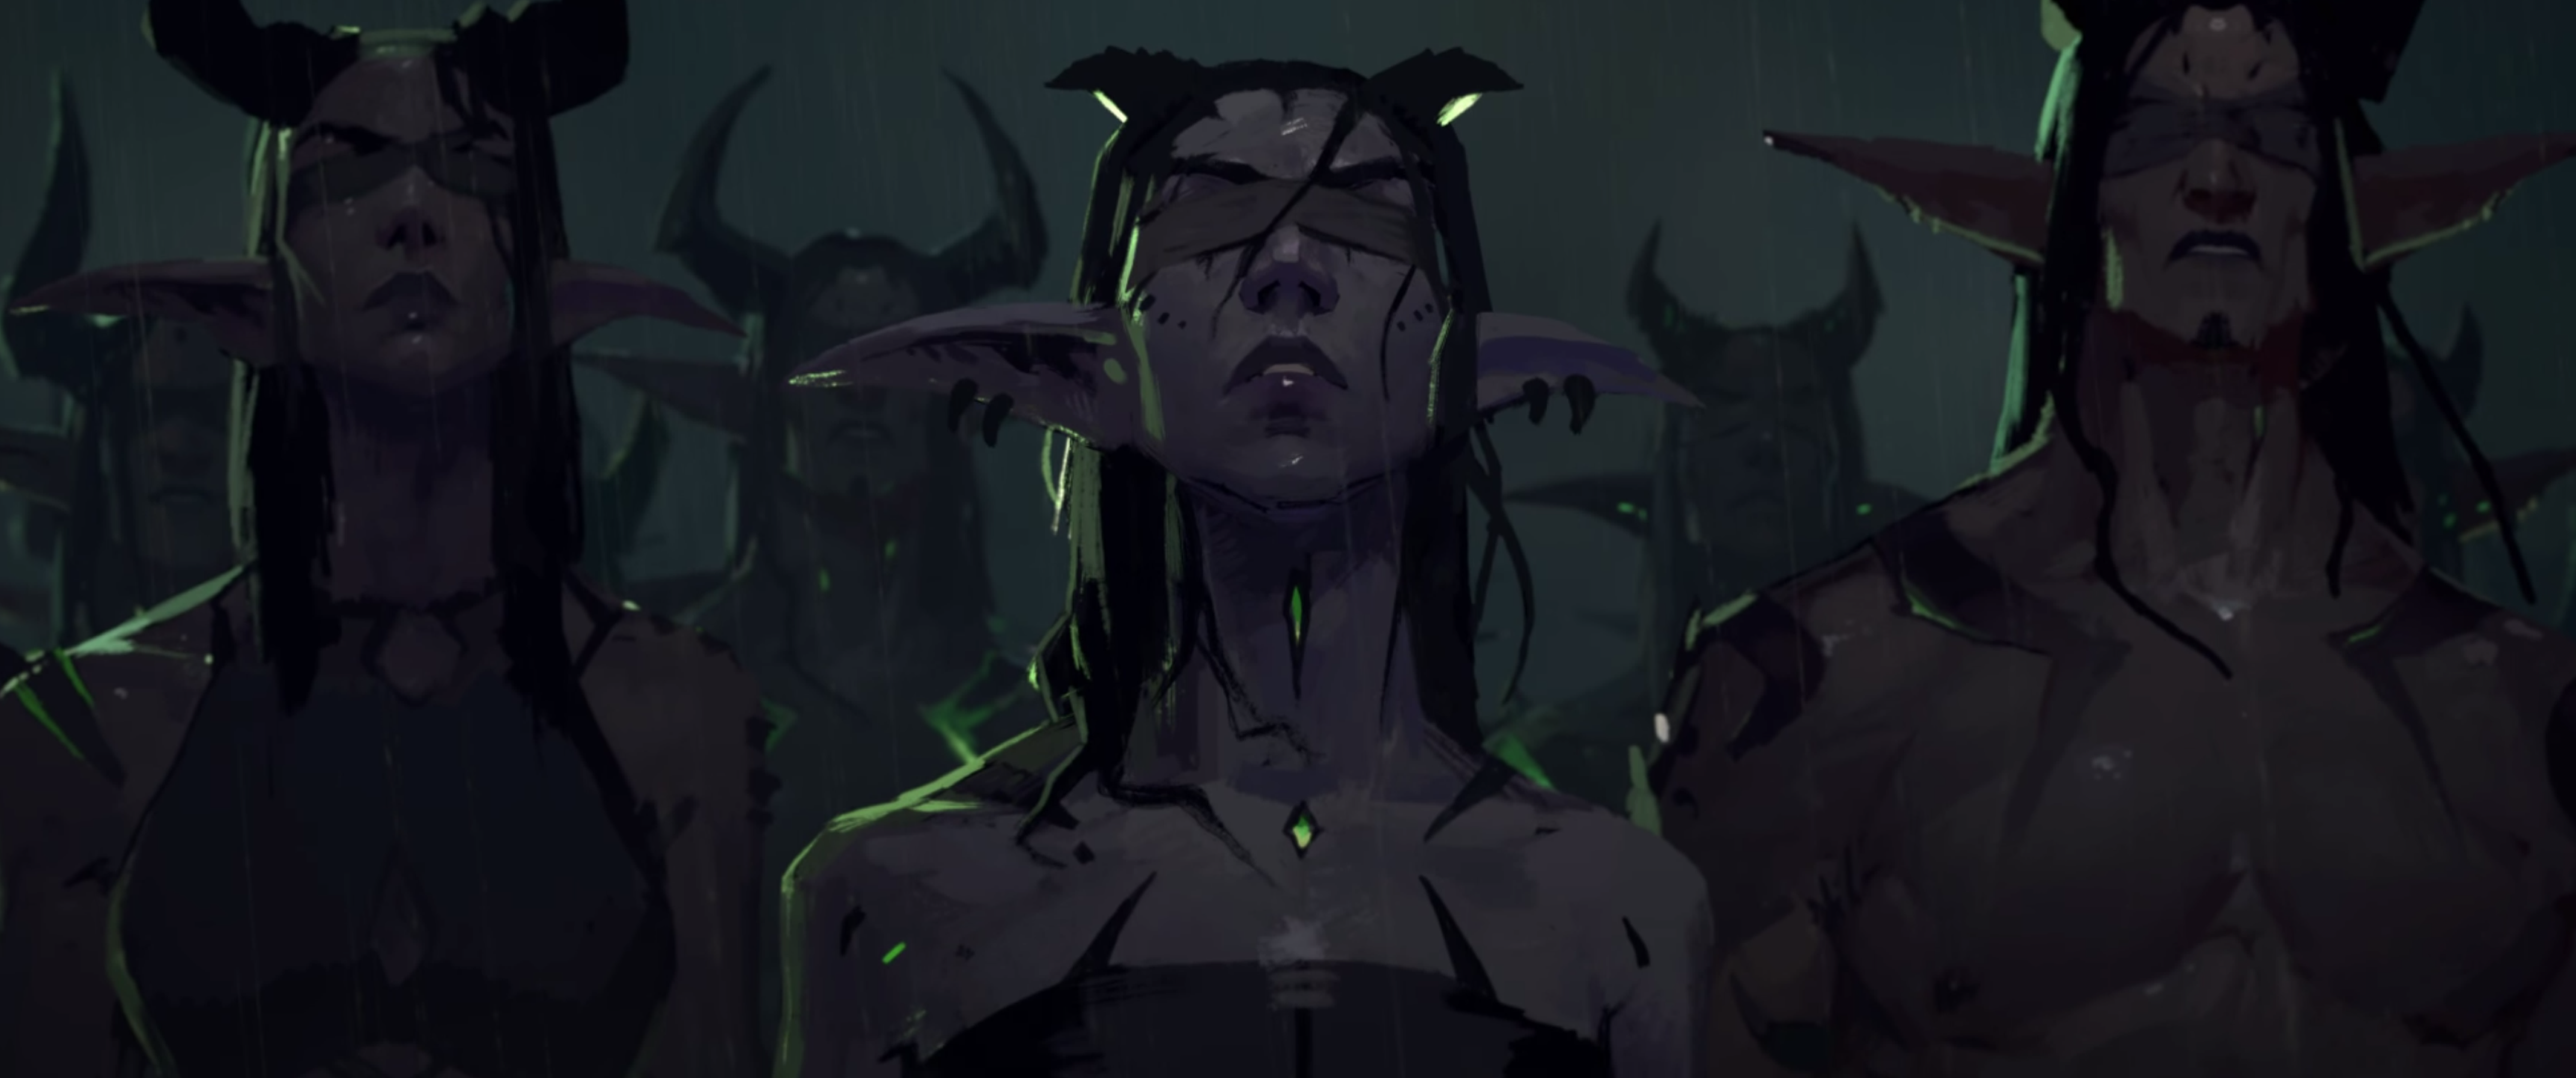 General 3440x1440 World of Warcraft Blizzard Entertainment Demon Hunter PC gaming video game art pointy ears blindfold